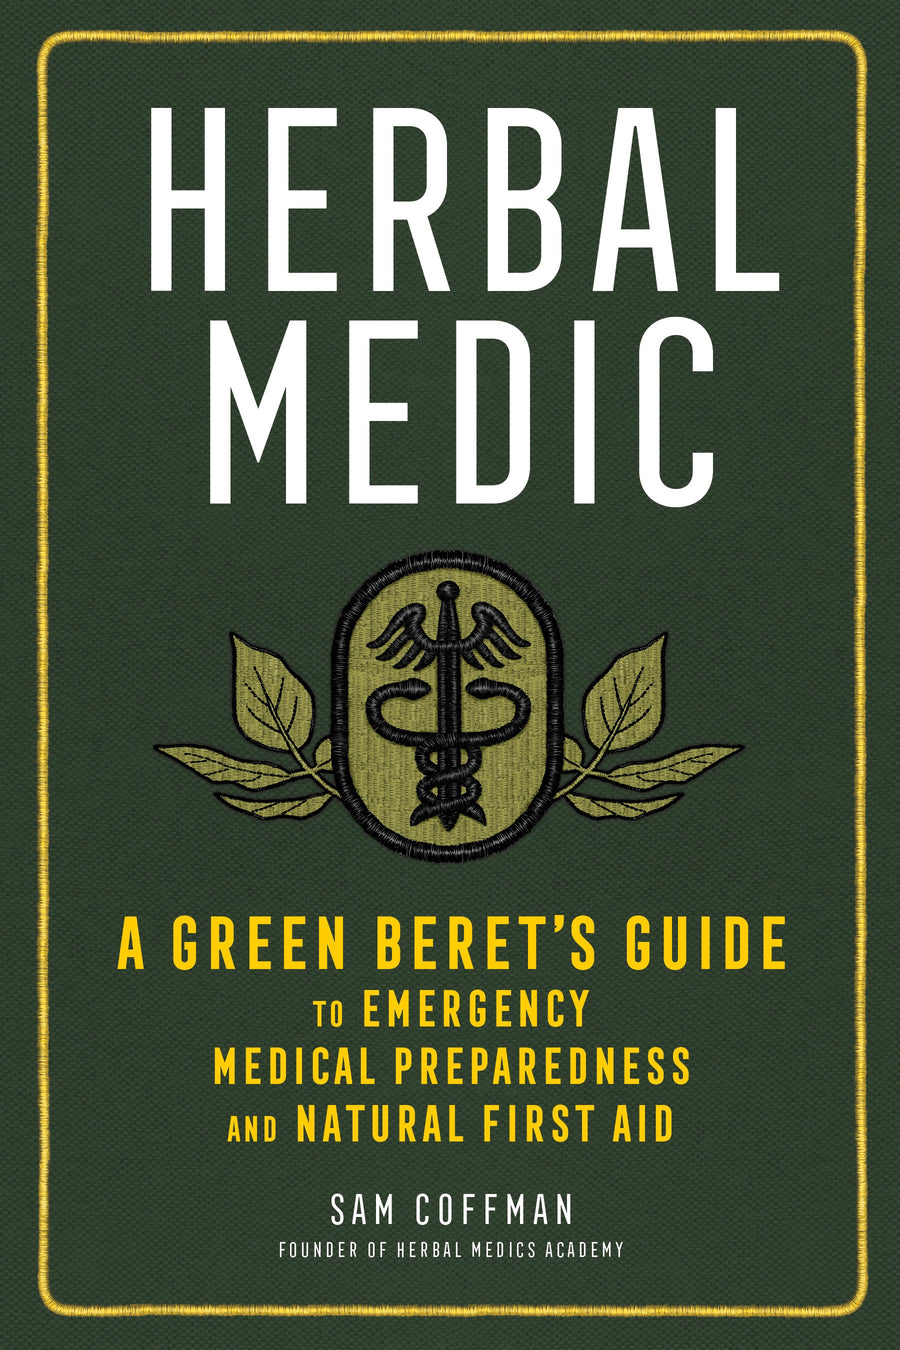 Green Book Called Herbal Medic by Sam Coffman. 